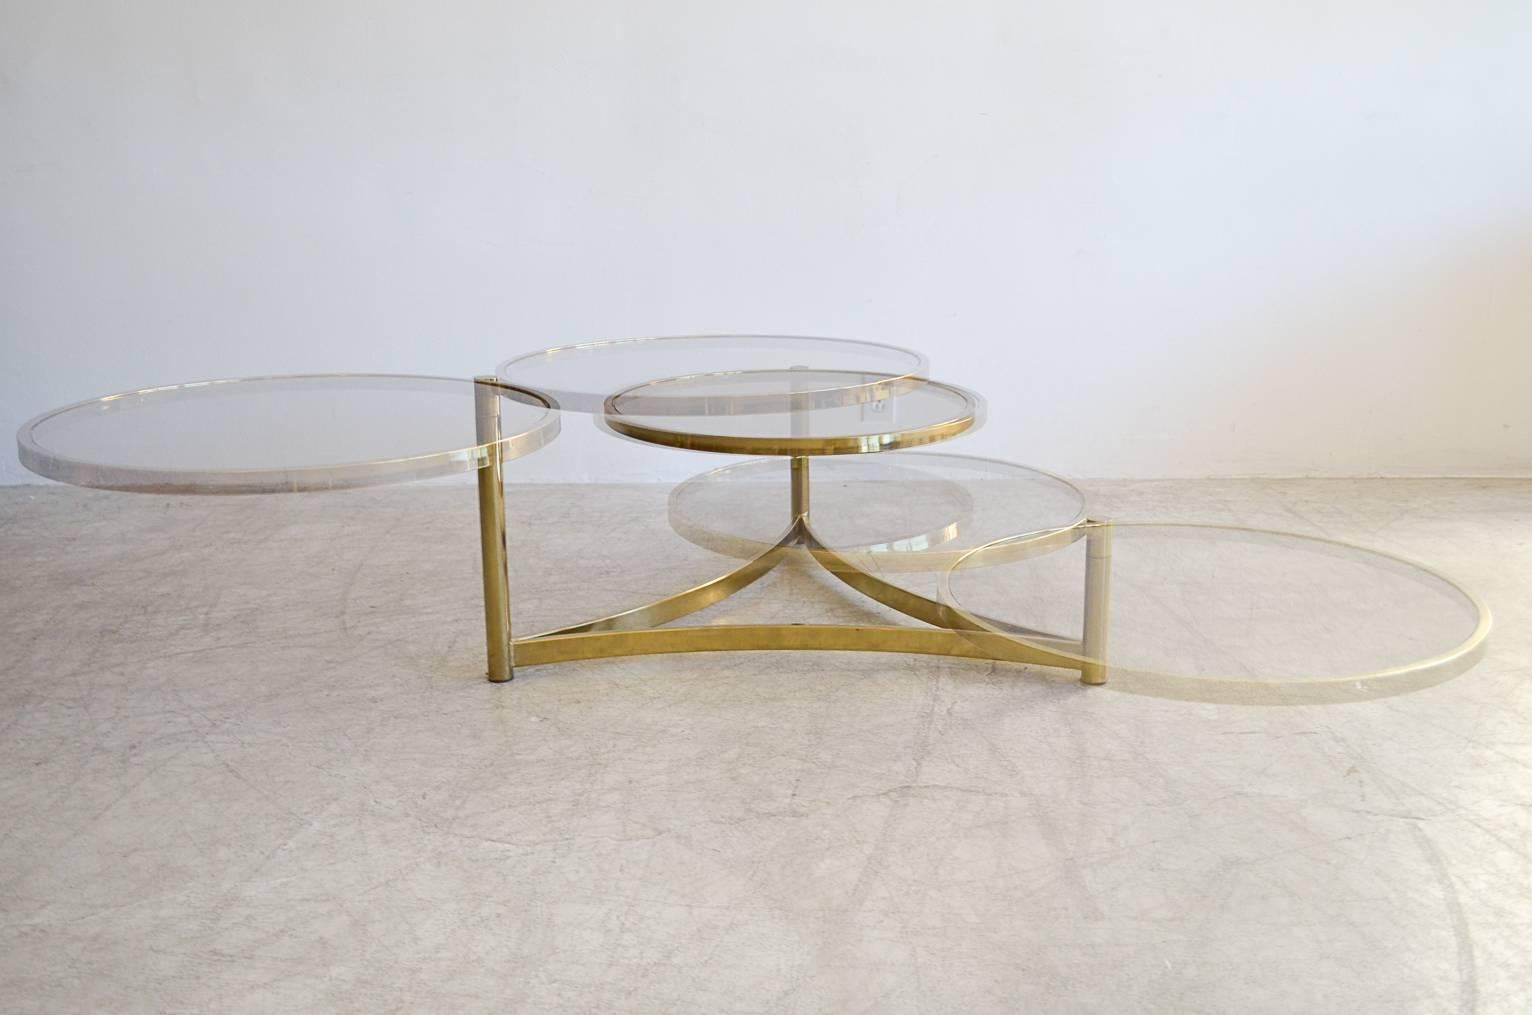 Beautiful tri level brass and glass swivel coffee table with lightly smoked glass coffee table with designer triangle base.  Allows for a more sturdy base when round tiers are extended.  See additional photos.

Brass is in excellent condition and